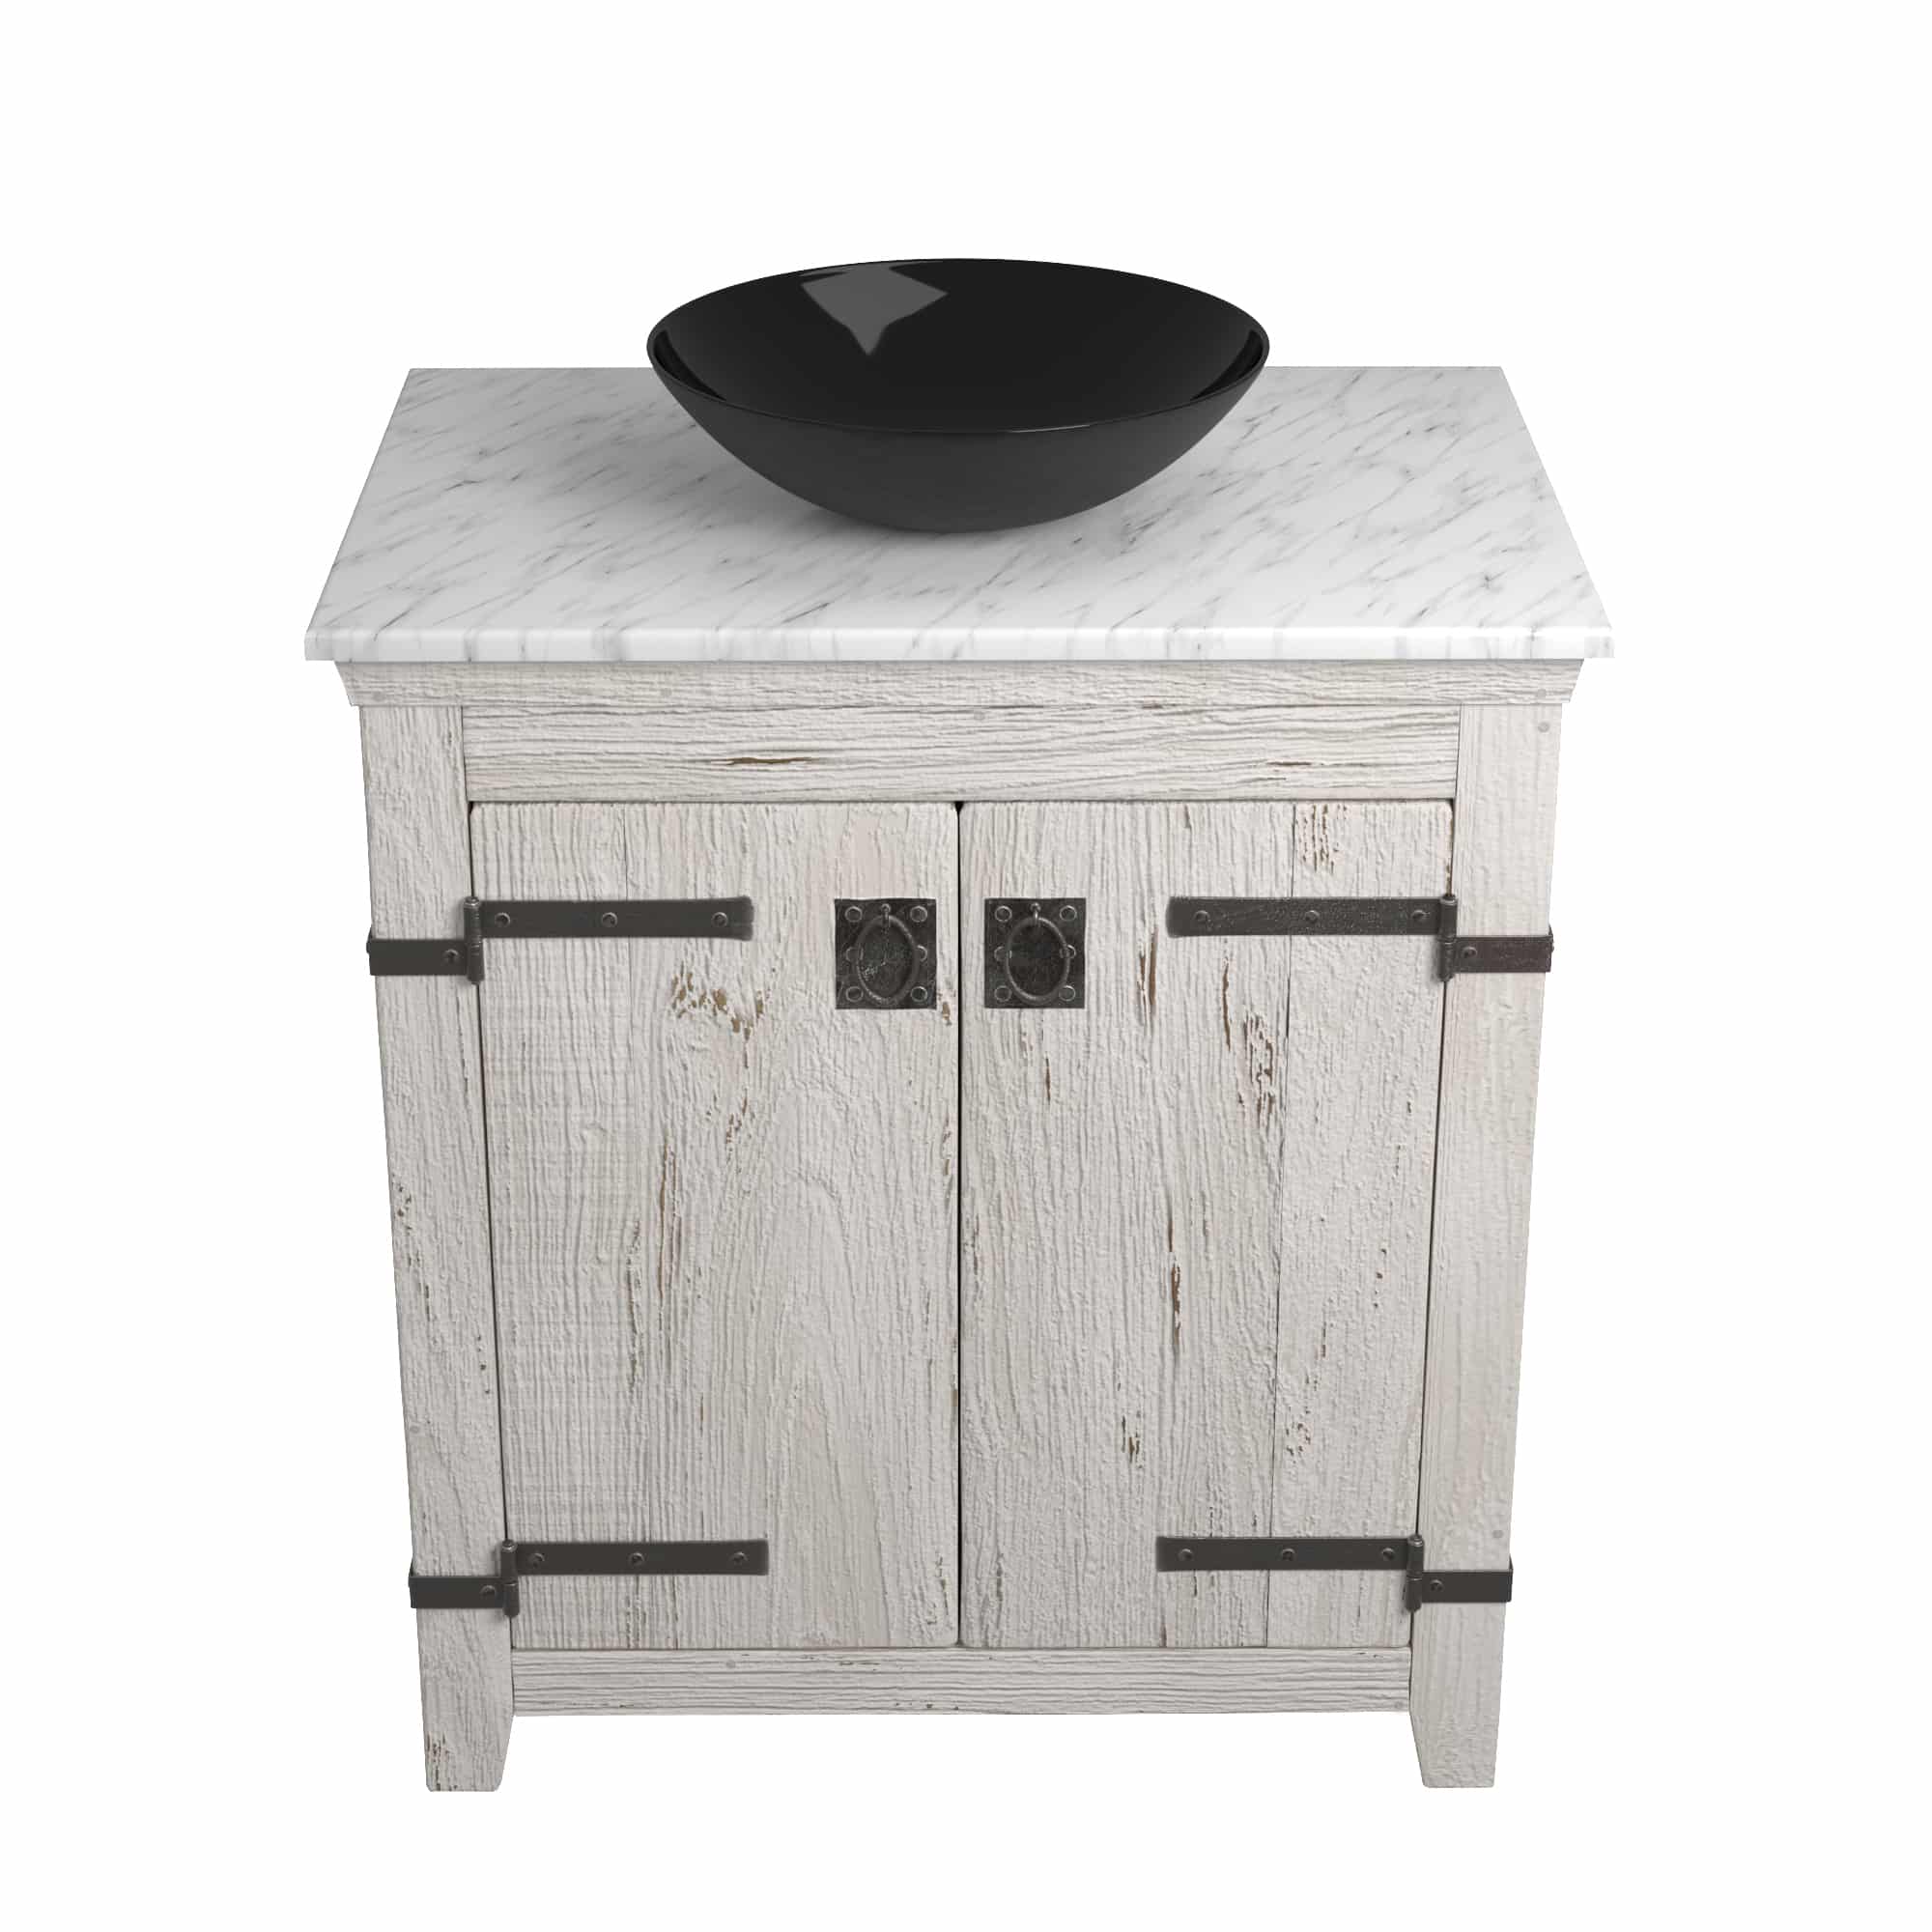 Native Trails 30" Americana Vanity in Whitewash with Carrara Marble Top and Verona in Abyss, Single Faucet Hole, BND30-VB-CT-MG-065